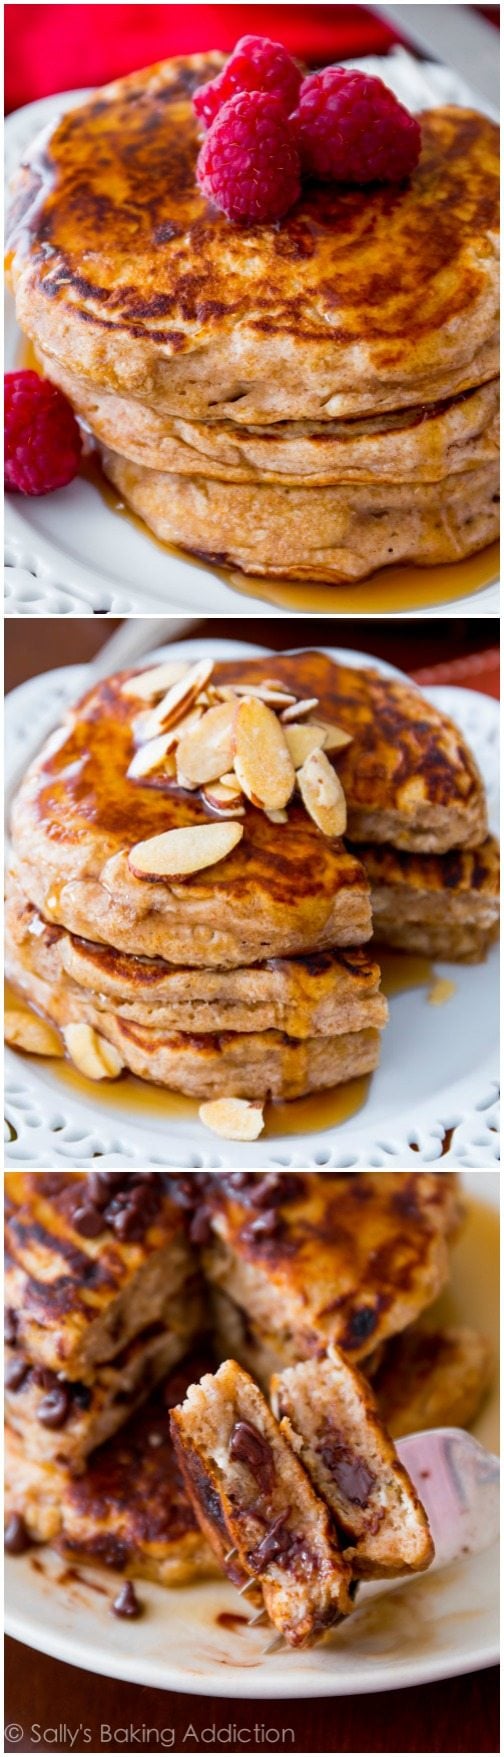 3 images of stacks of whole wheat pancakes